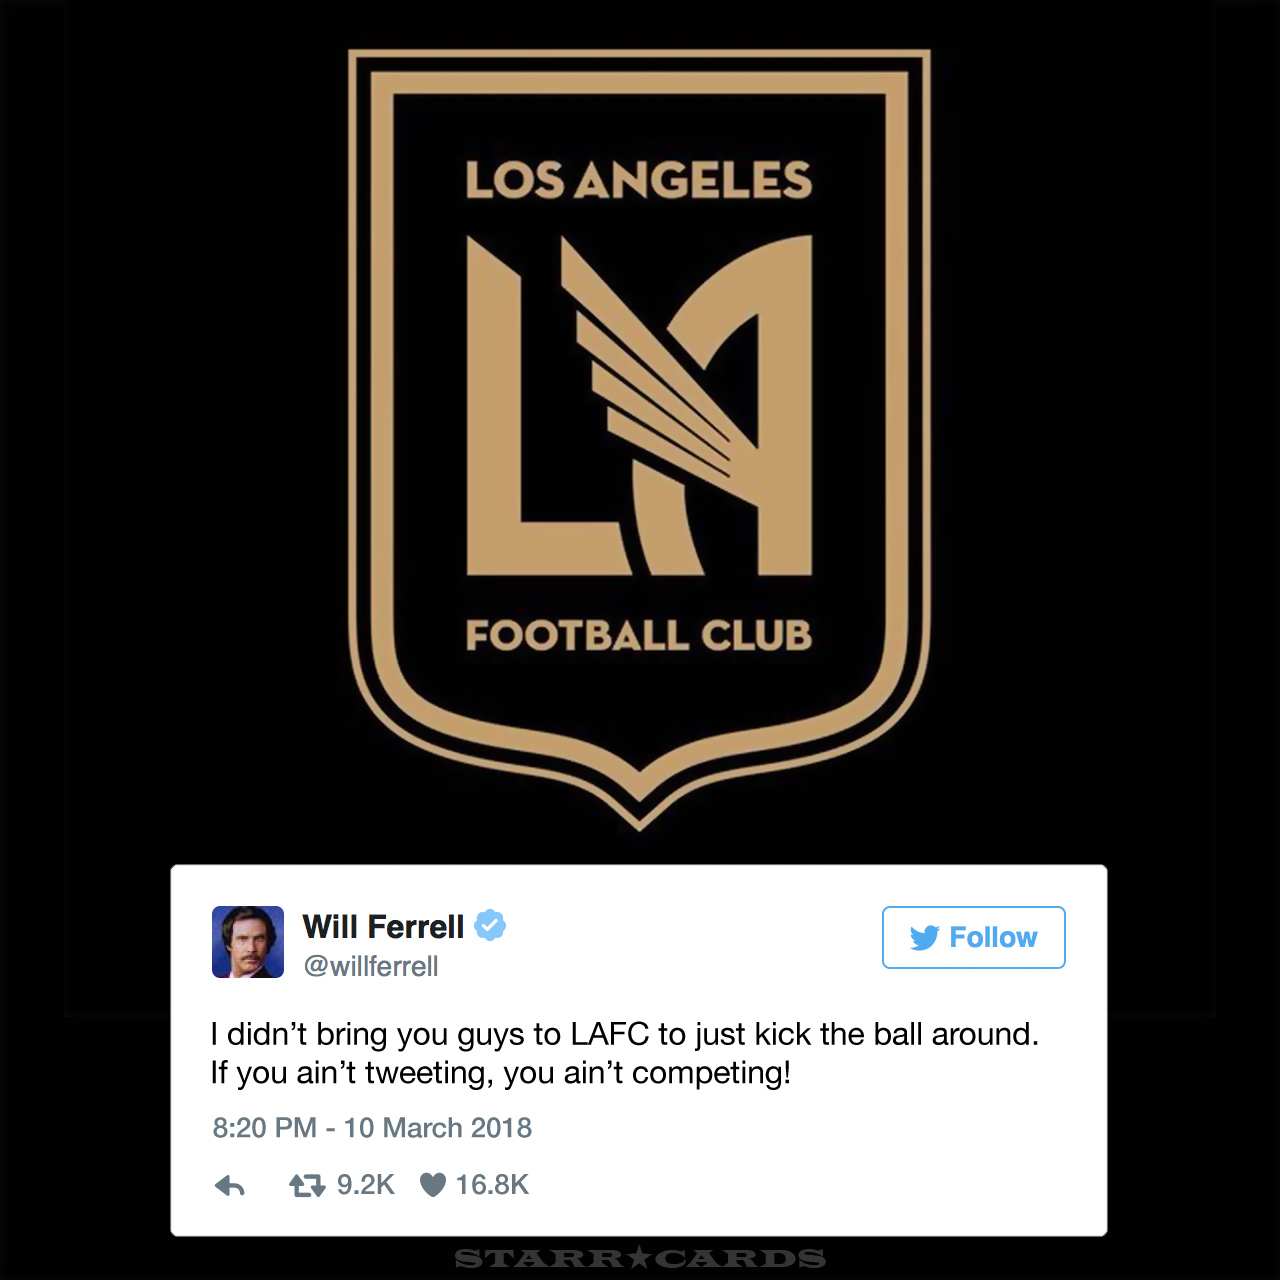 Future Will Ferrell tweets to LAFC players to tweet more